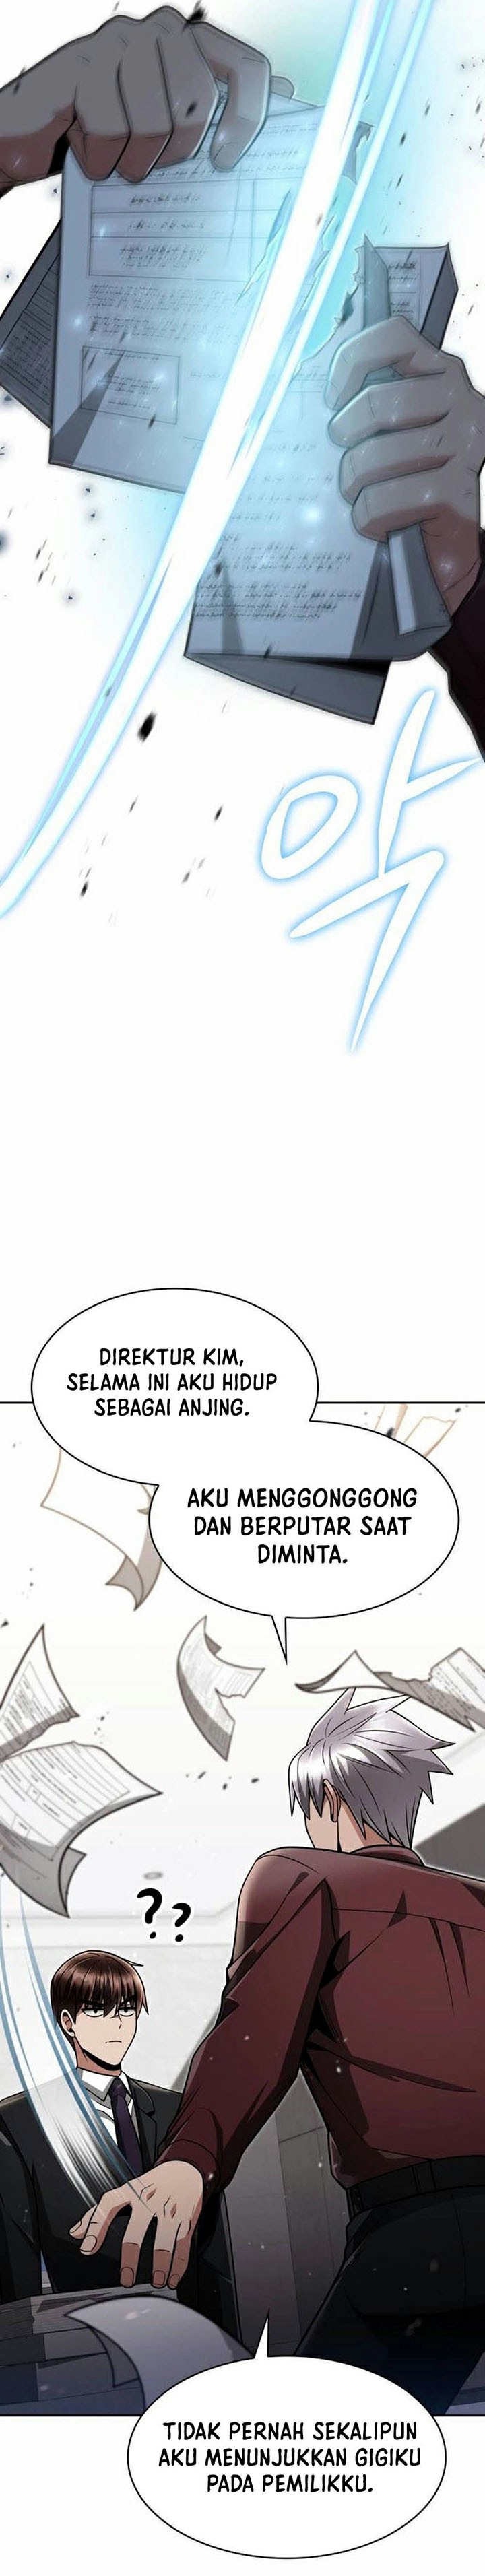 Dilarang COPAS - situs resmi www.mangacanblog.com - Komik clever cleaning life of the returned genius hunter 062 - chapter 62 63 Indonesia clever cleaning life of the returned genius hunter 062 - chapter 62 Terbaru 37|Baca Manga Komik Indonesia|Mangacan